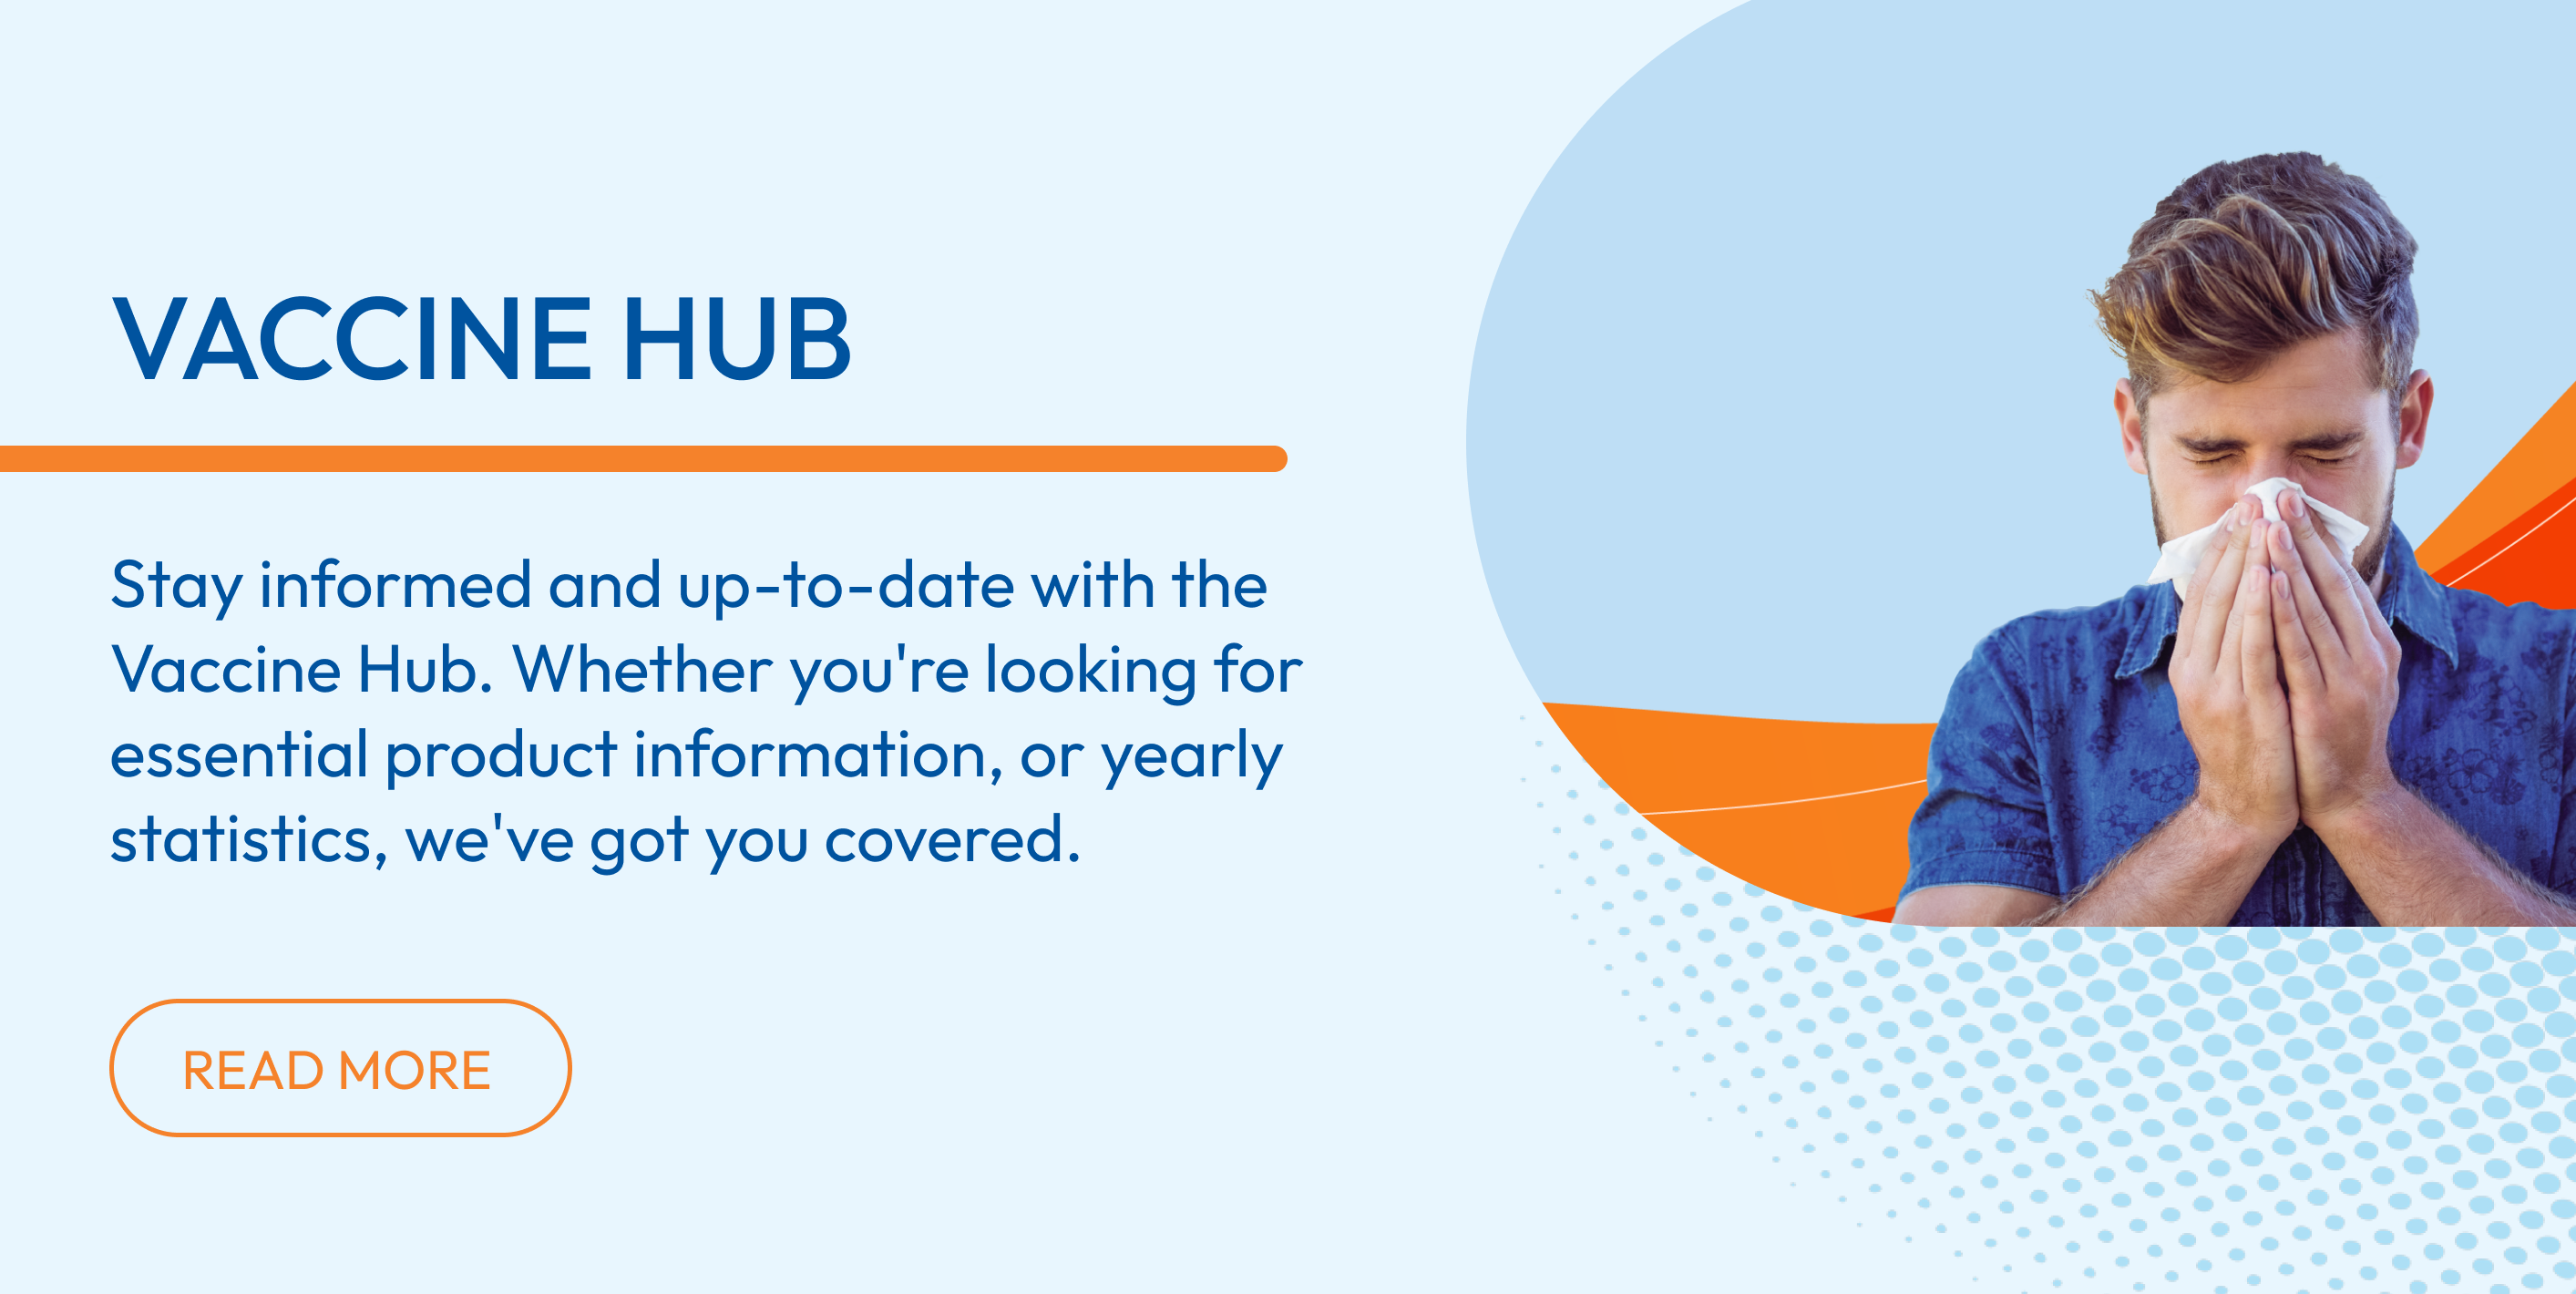 Vaccine Hub tile. Text on the tile: Stay informed and up-to-date with the Vaccine Hub. Whether you're looking for essential product information or yearly statistics, we've got you covered. Read more link leading to https://www.teammed.com.au/influenza/